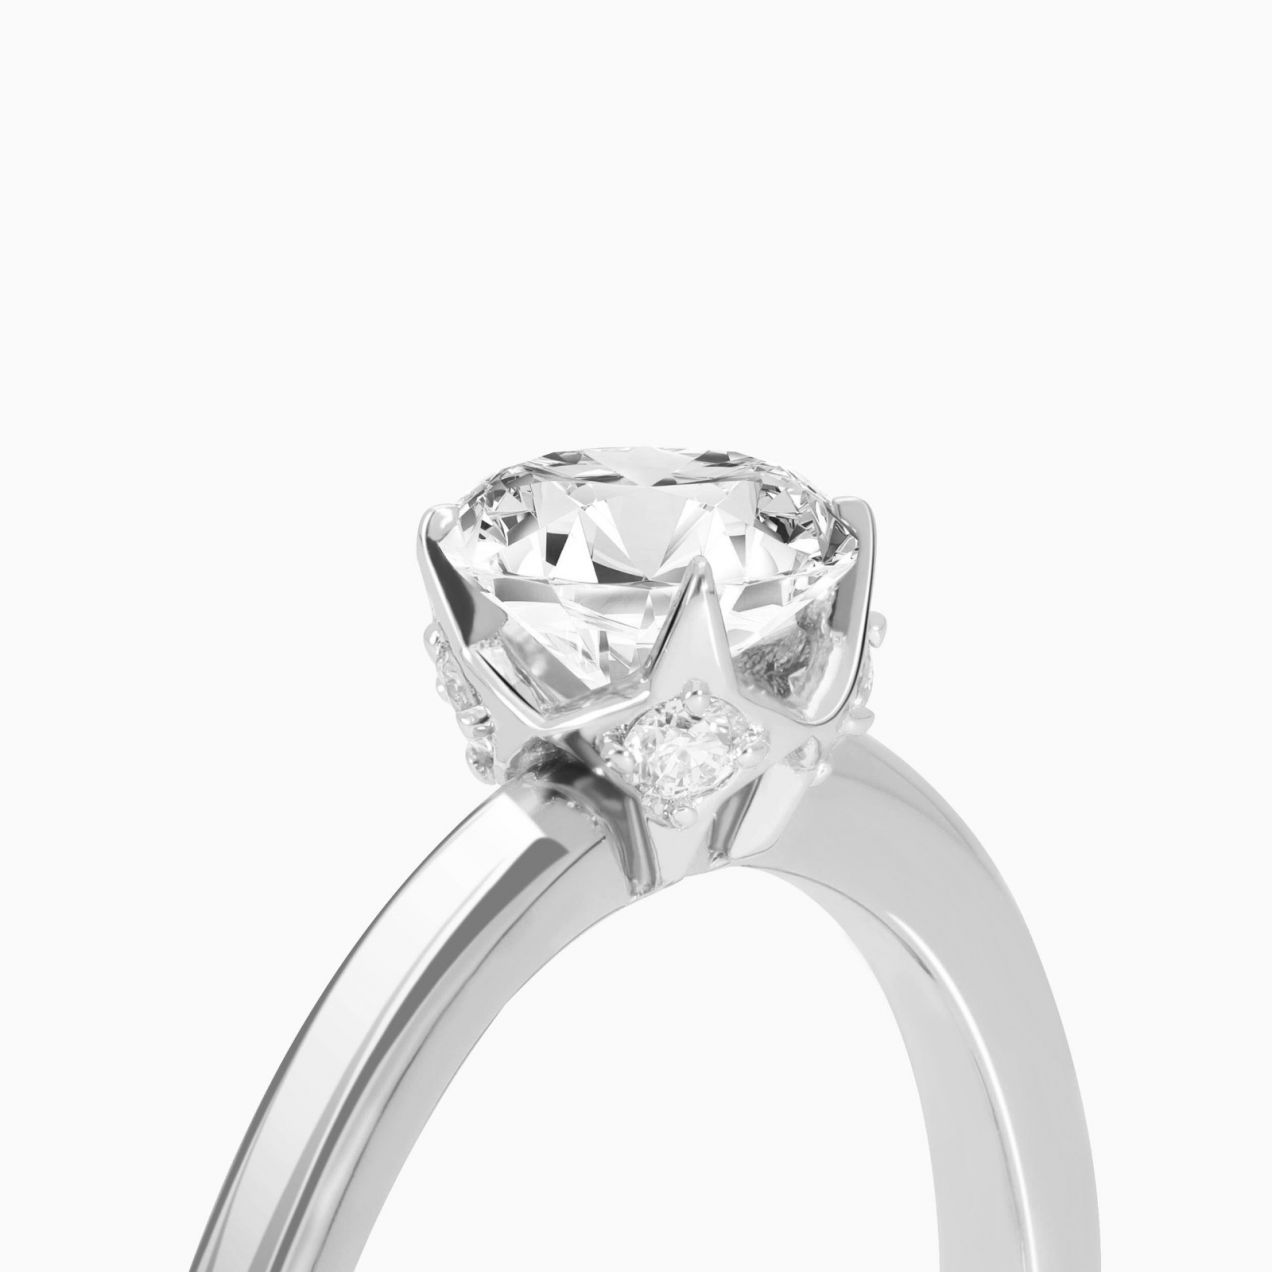 Solitaire ring in white gold with a central diamond and mini diamonds